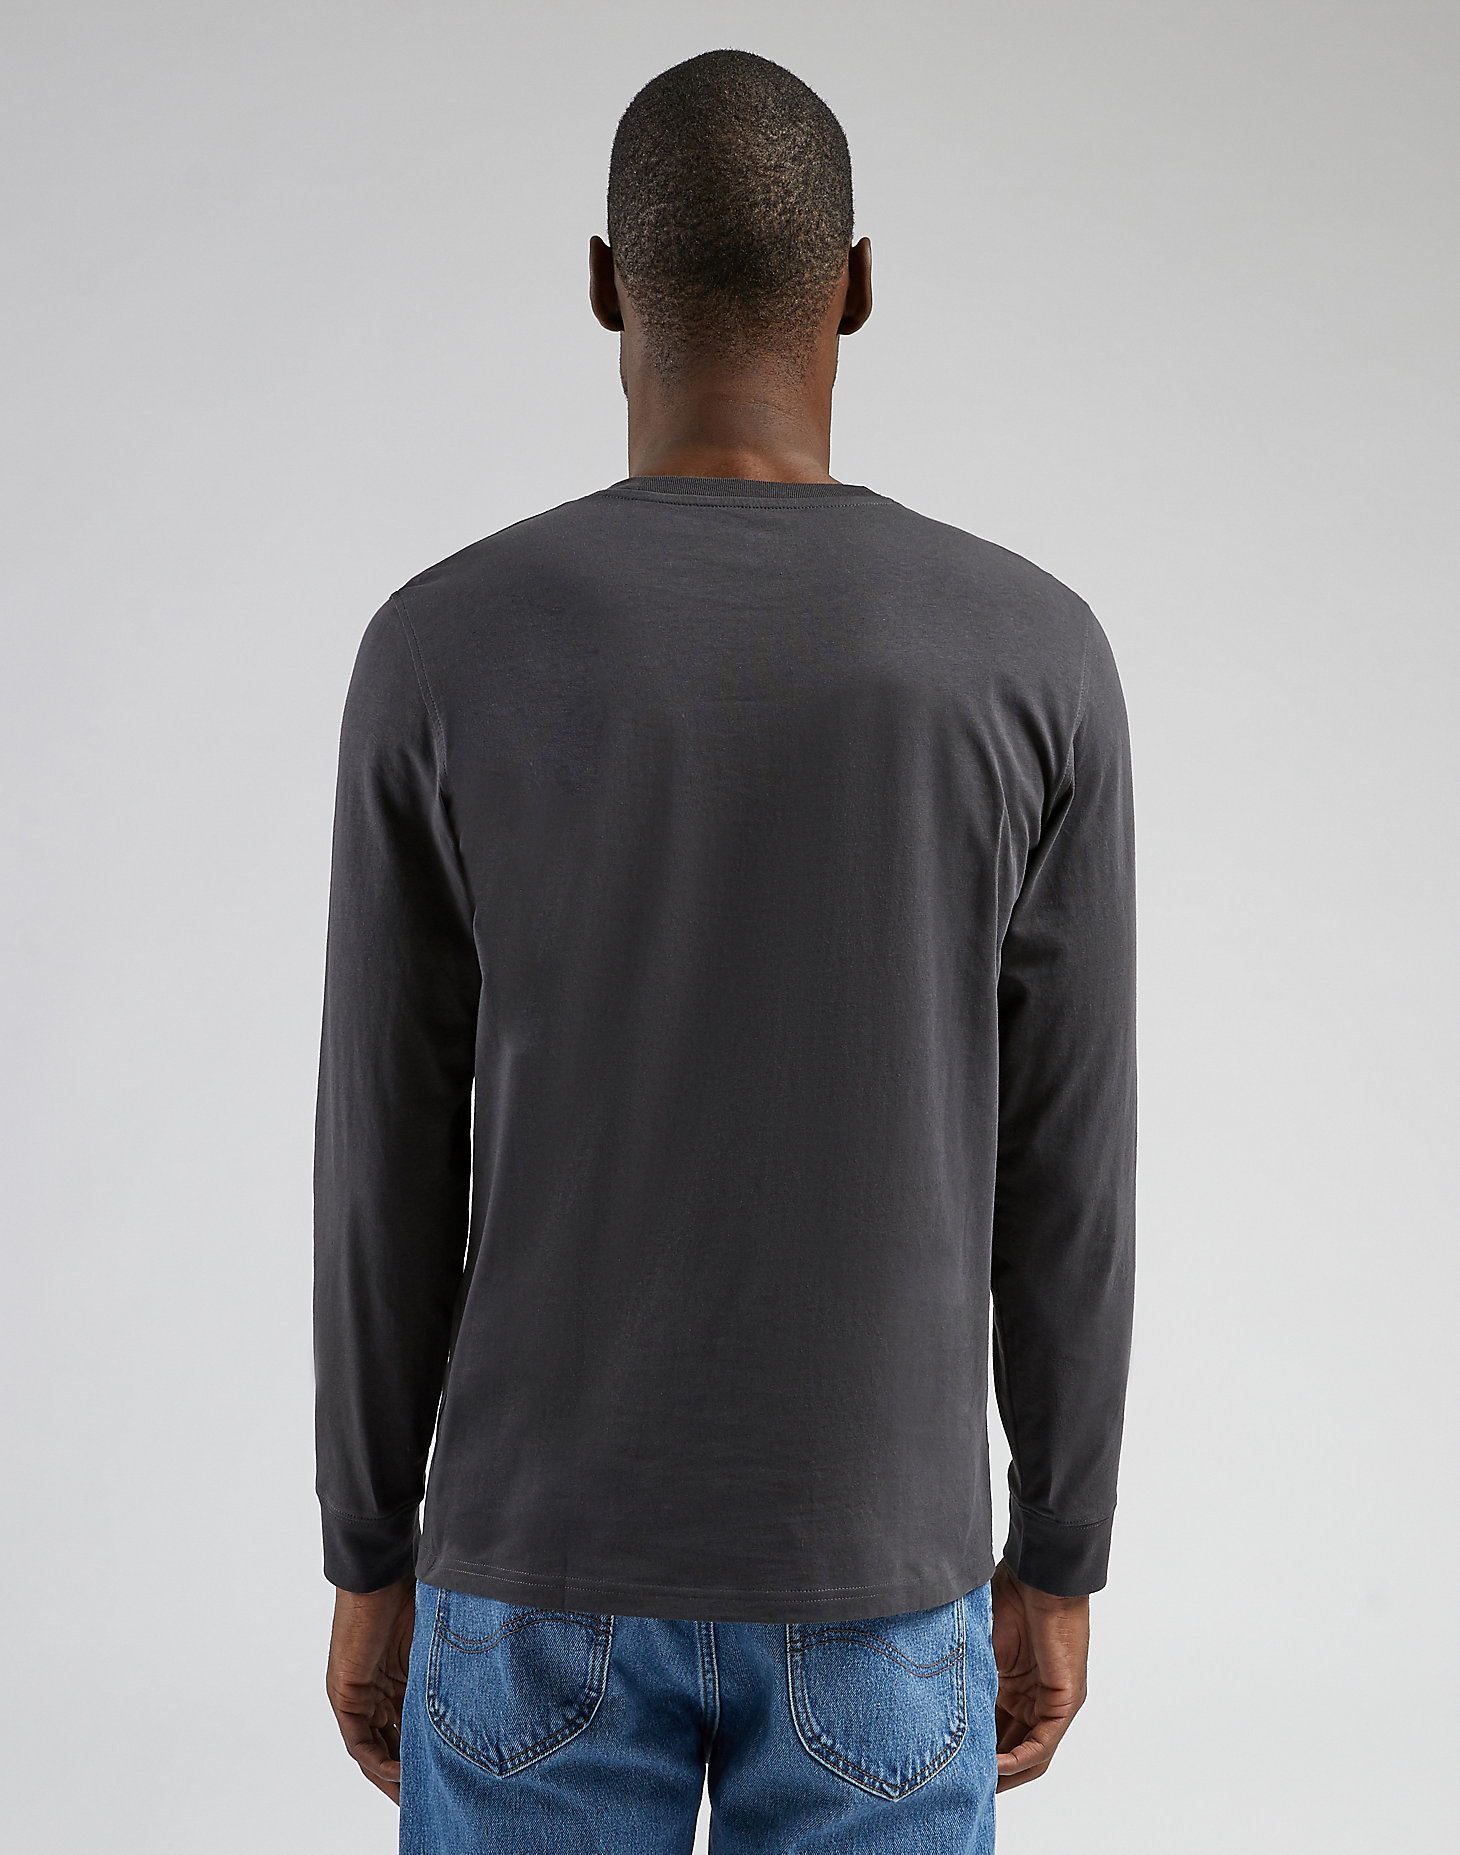 Long Sleeve Logo Tee in Washed Black alternative view 1